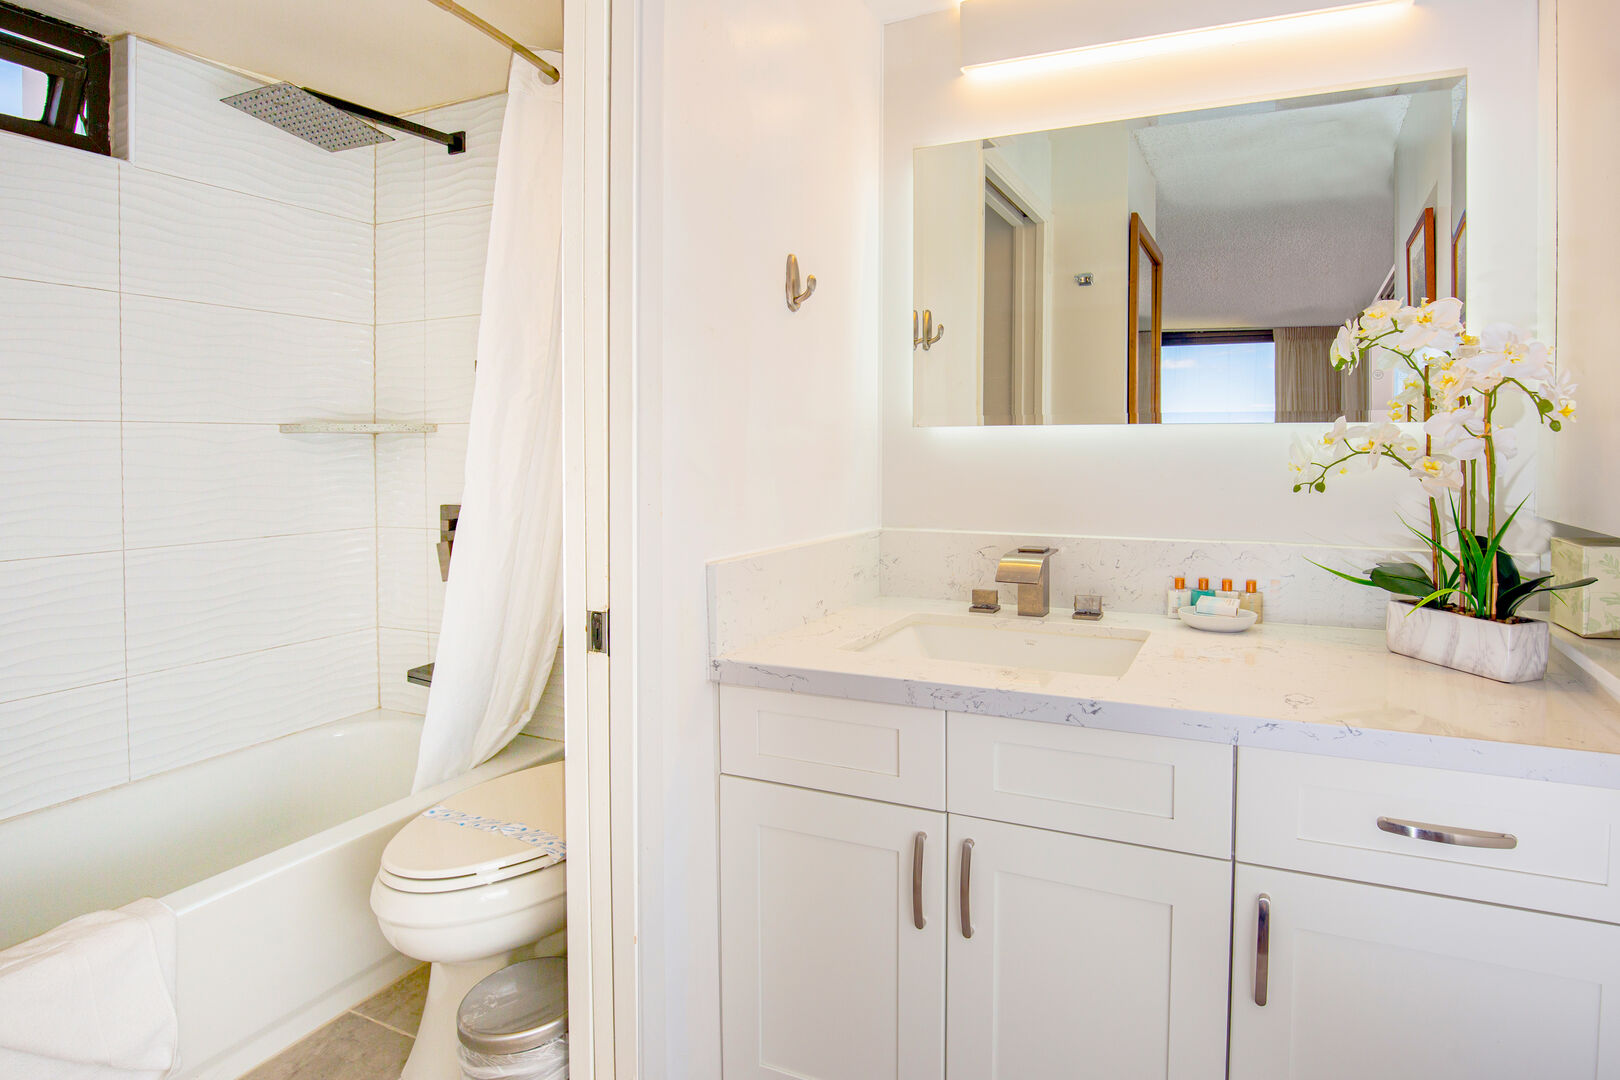 Bathroom with tub and shower combo. Sliding door separates the toilet and sink